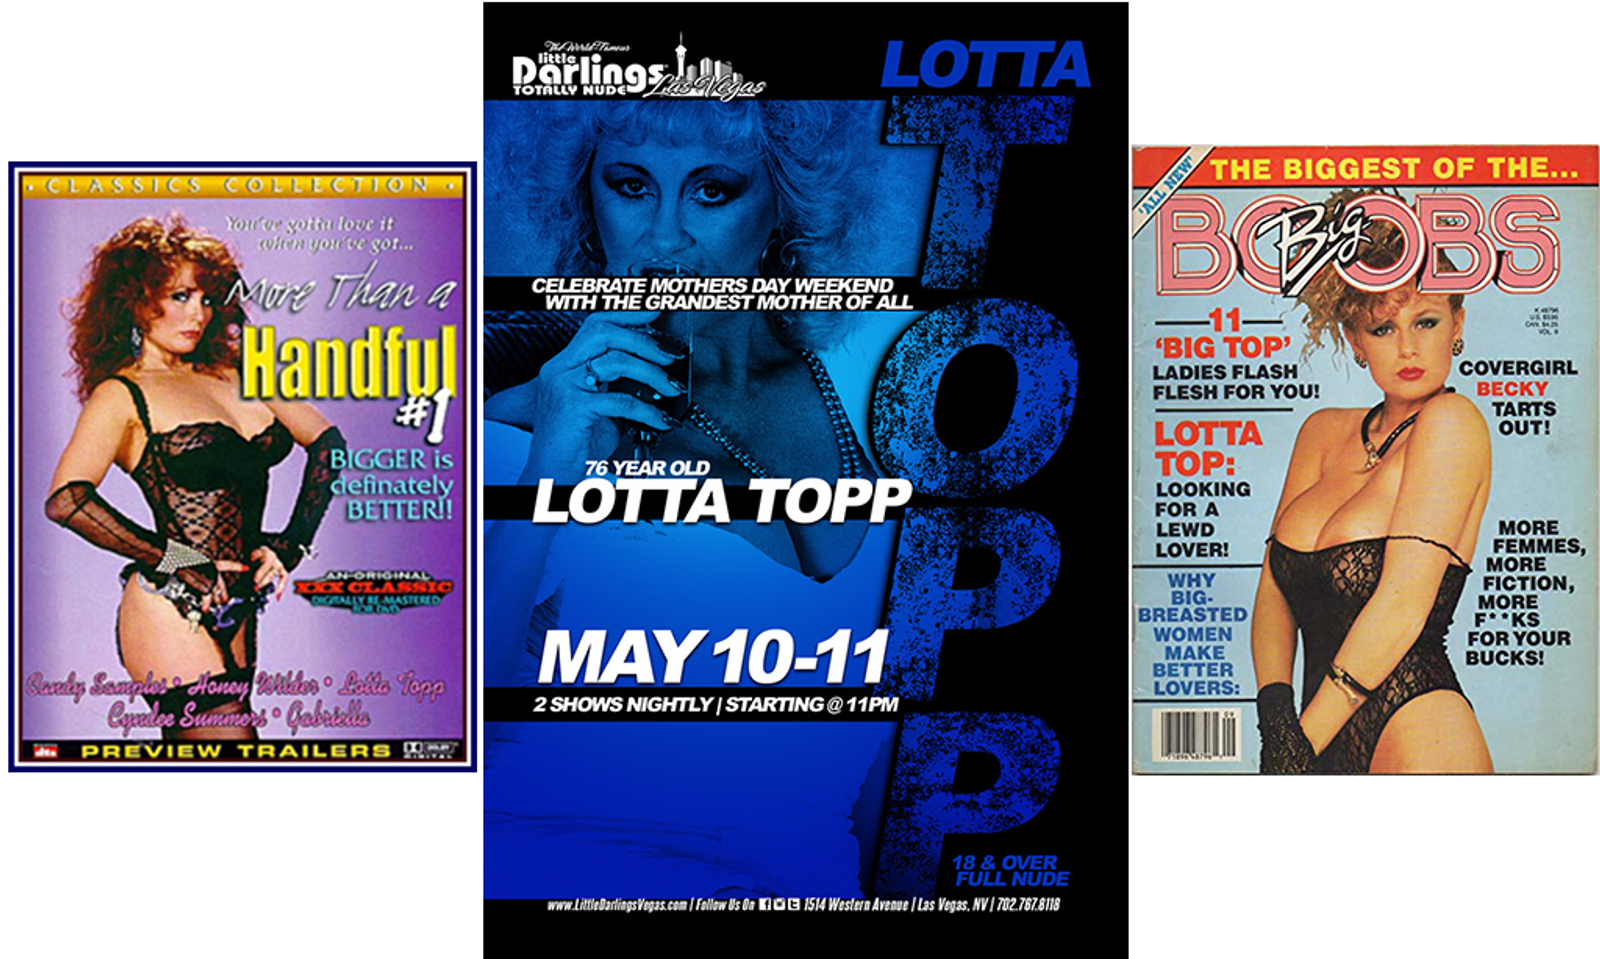 Lotta Topp to Feature at Little Darlings in Las Vegas This Week